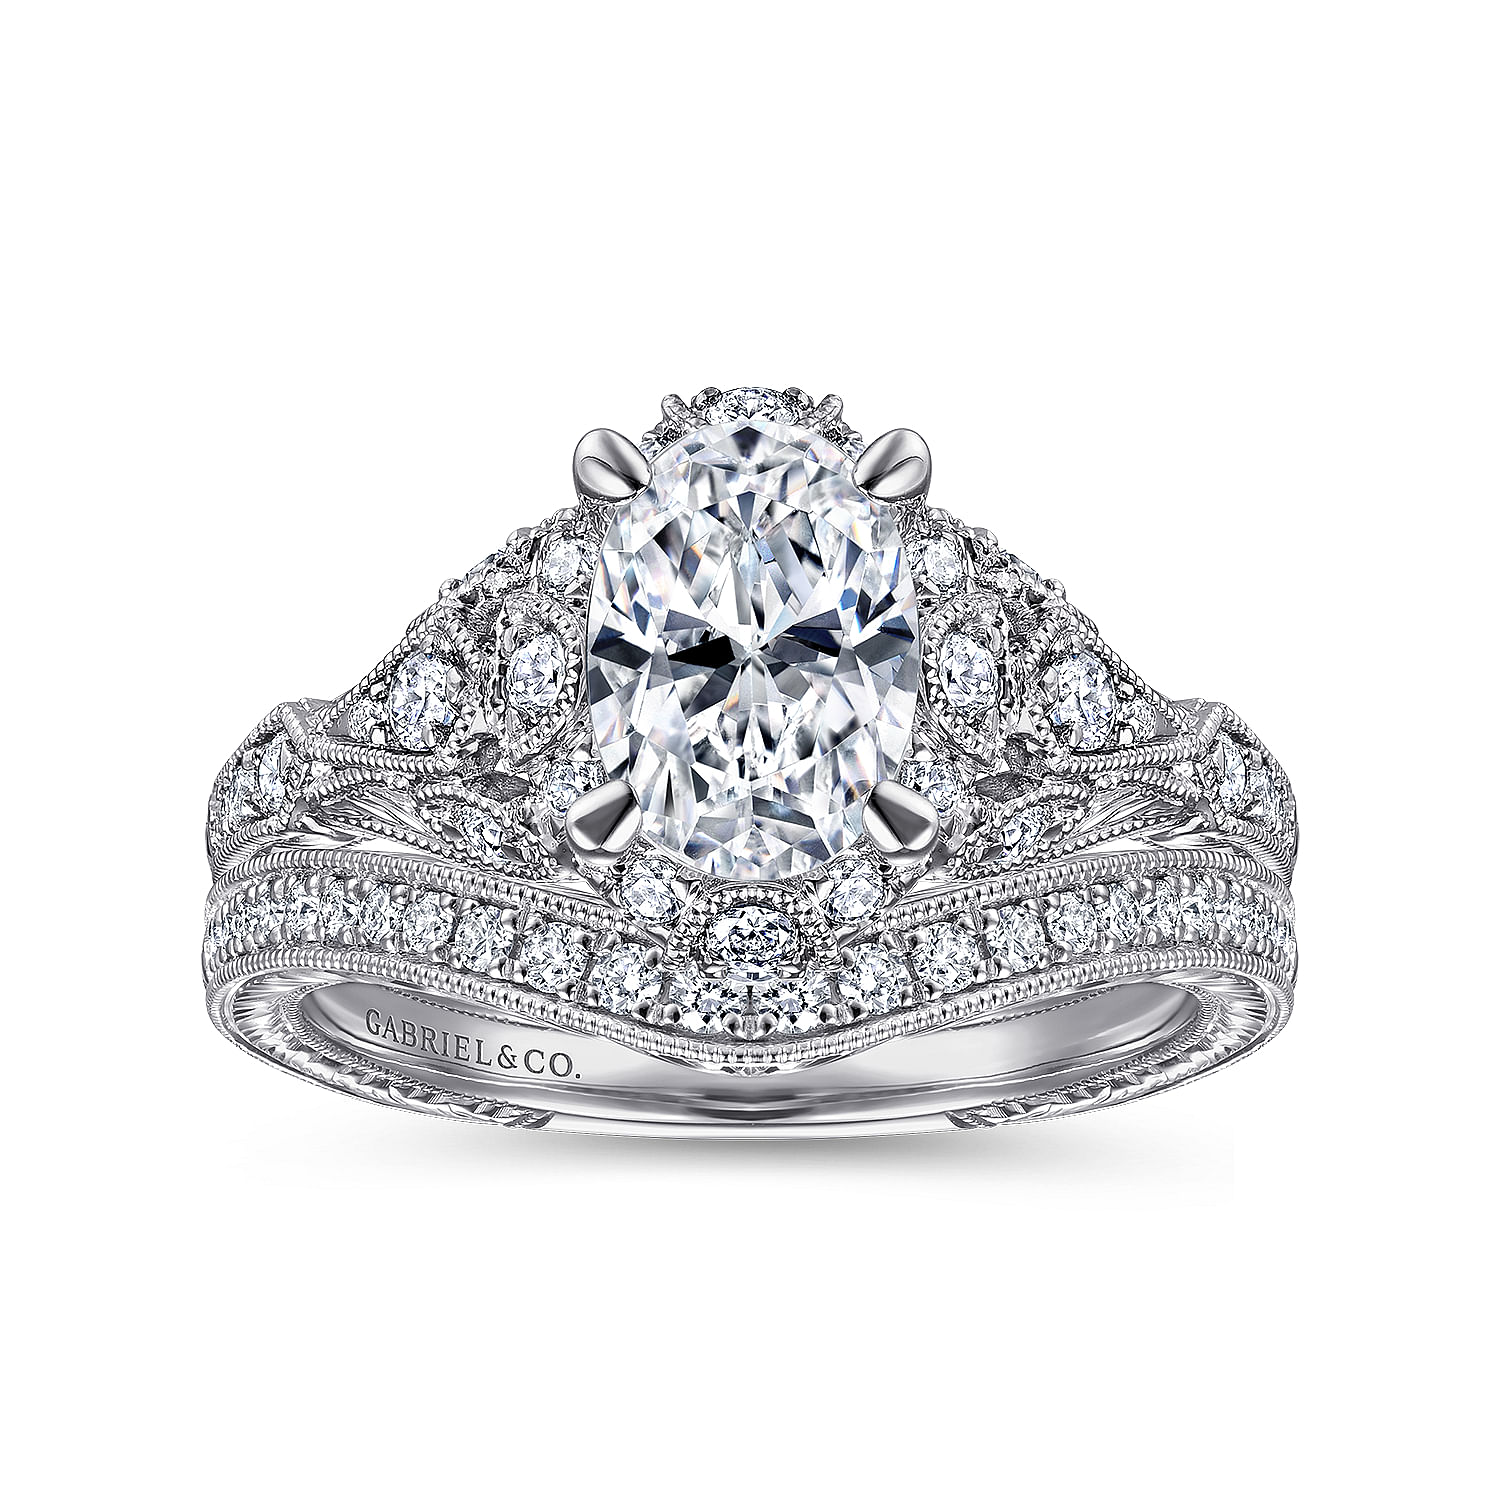 Unique 14K White Gold Vintage Inspired Oval Halo Diamond Engagement Ring